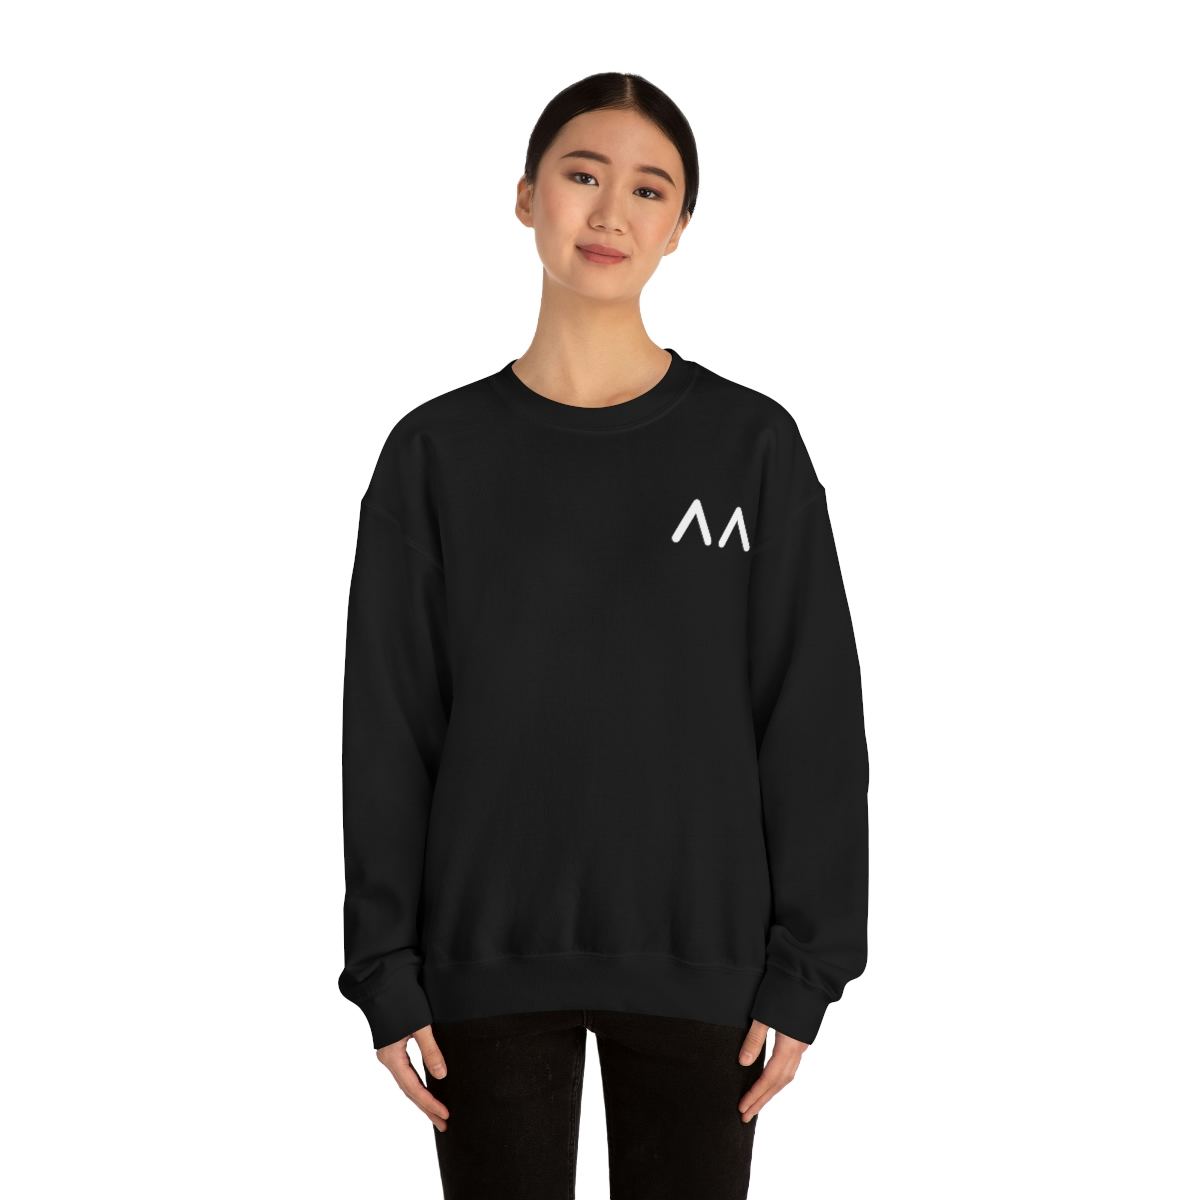 A young light skin tone female model wearing a black sweatshirt with stylized "AA" over the left breast denoting sickle cell trait status.